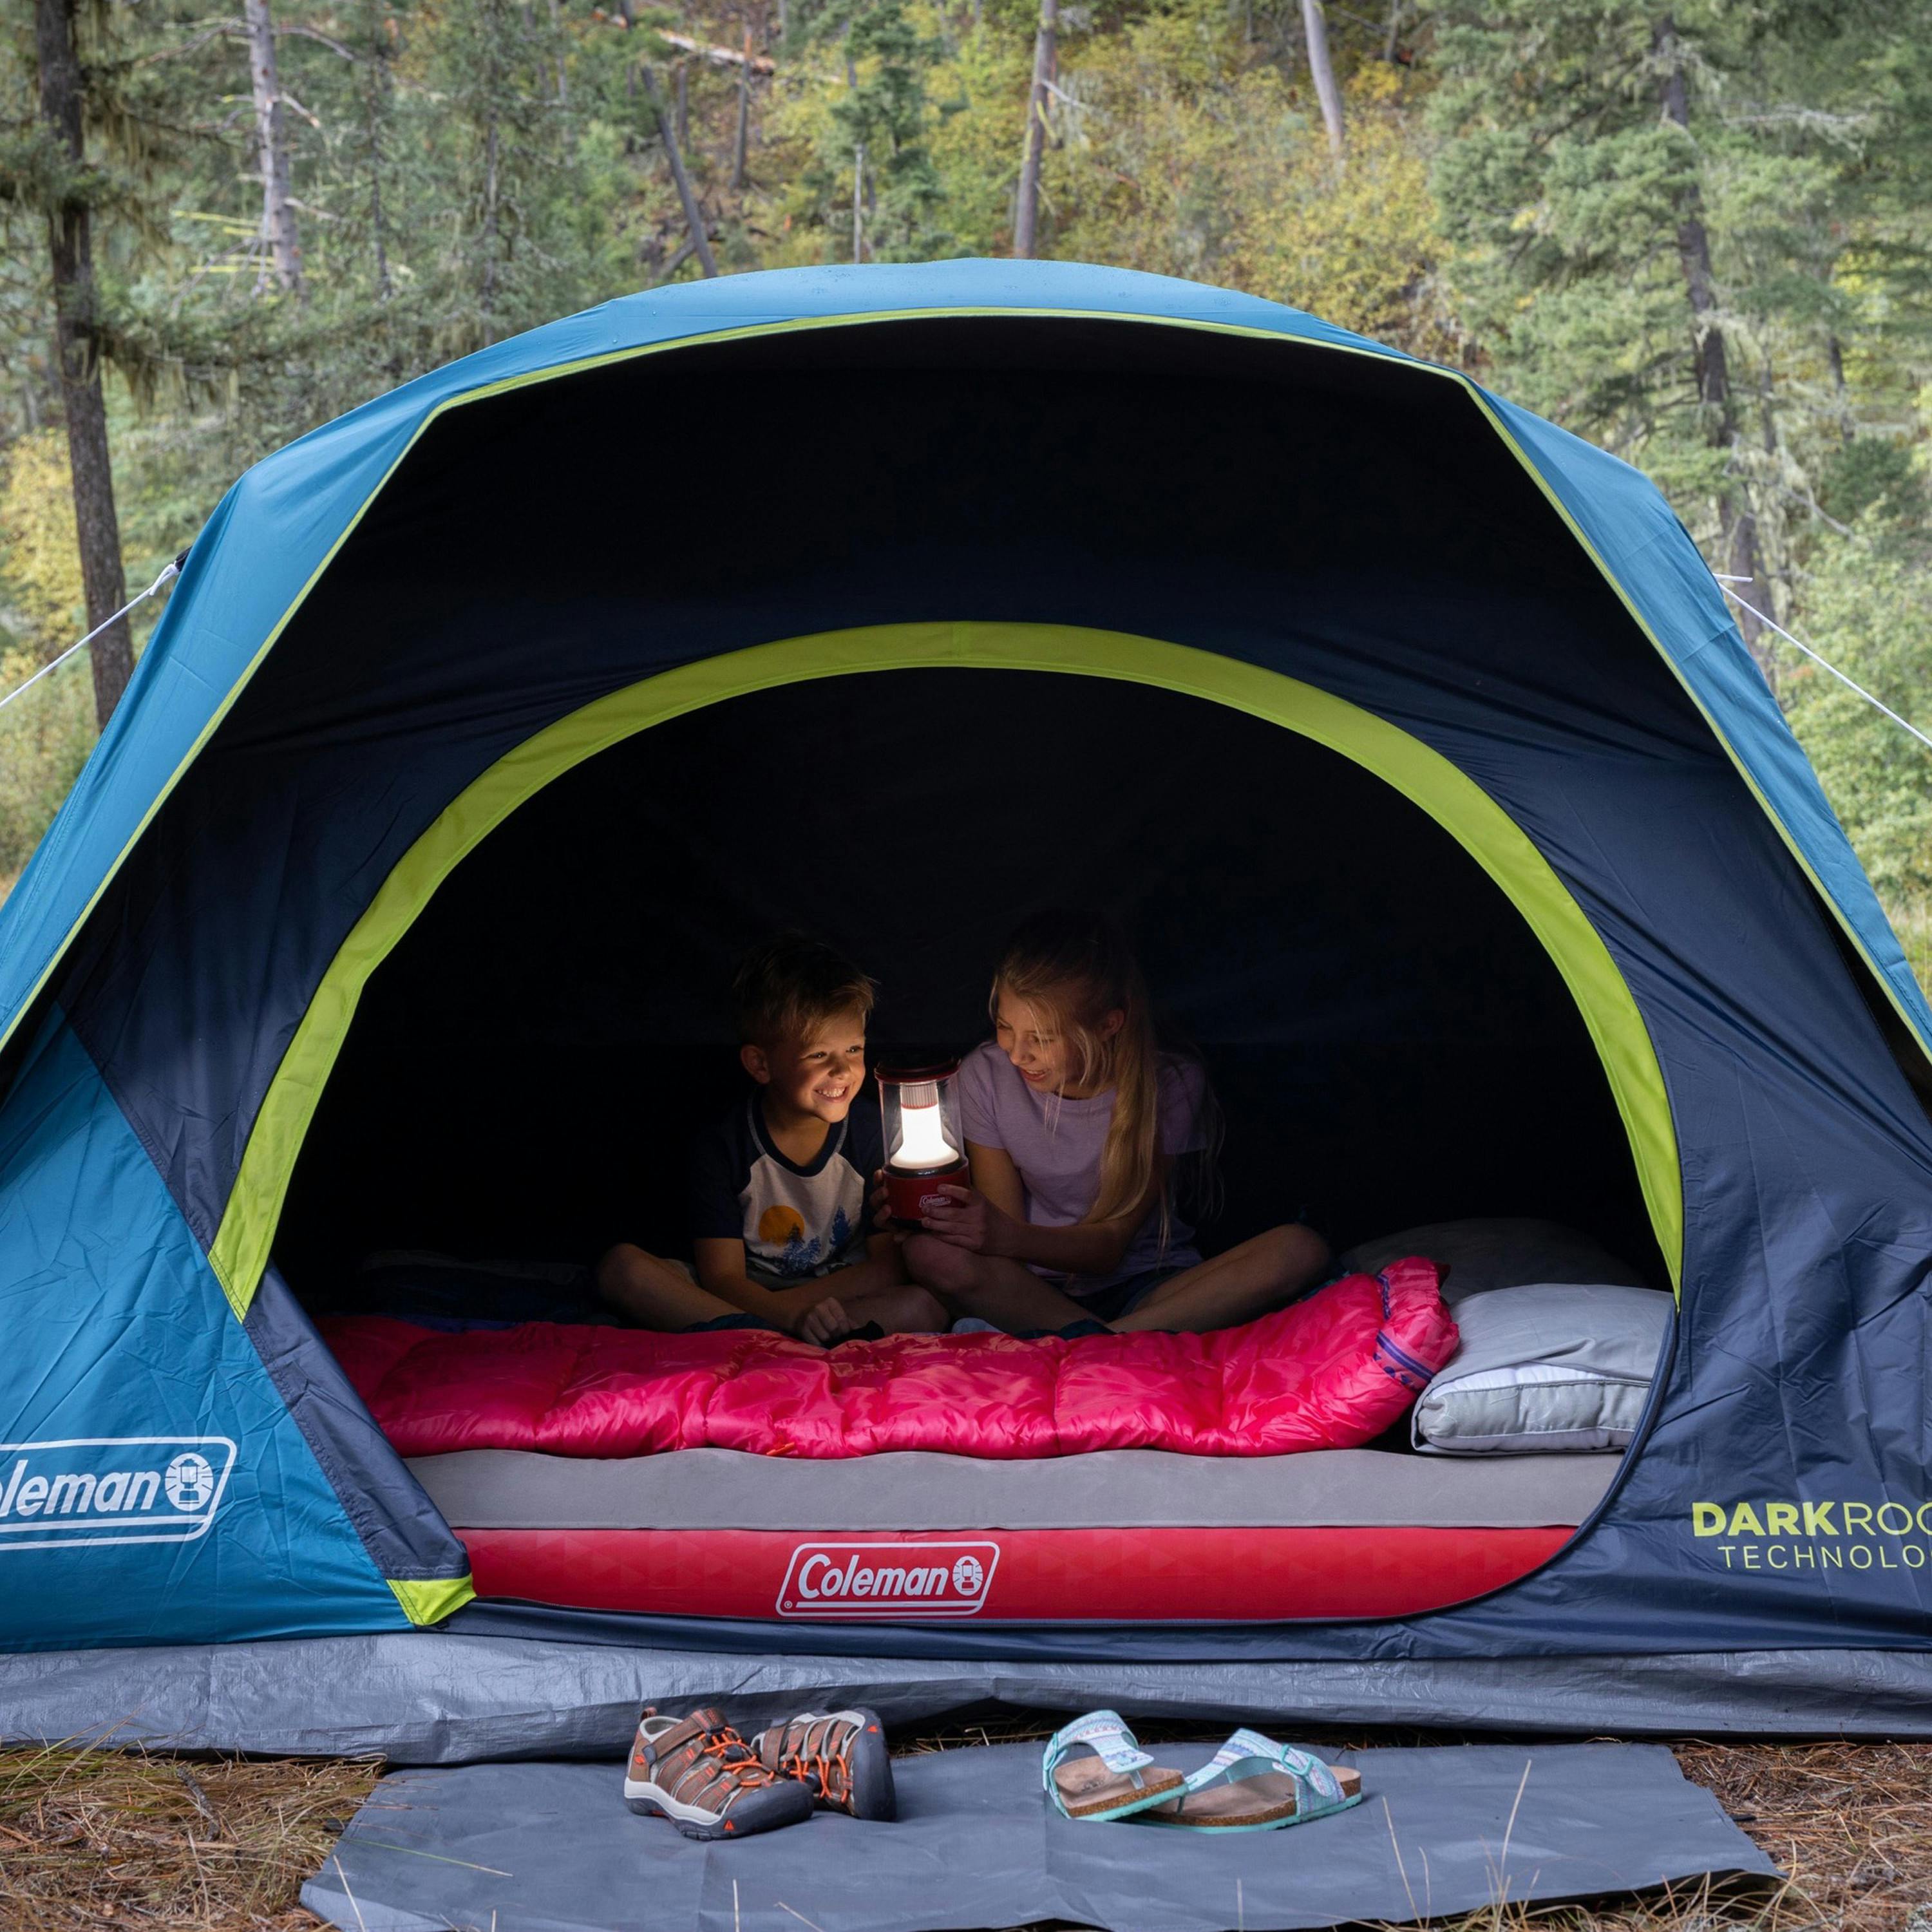 Coleman Skydome™ Camping Tent with Dark Room Technology · 4 Person